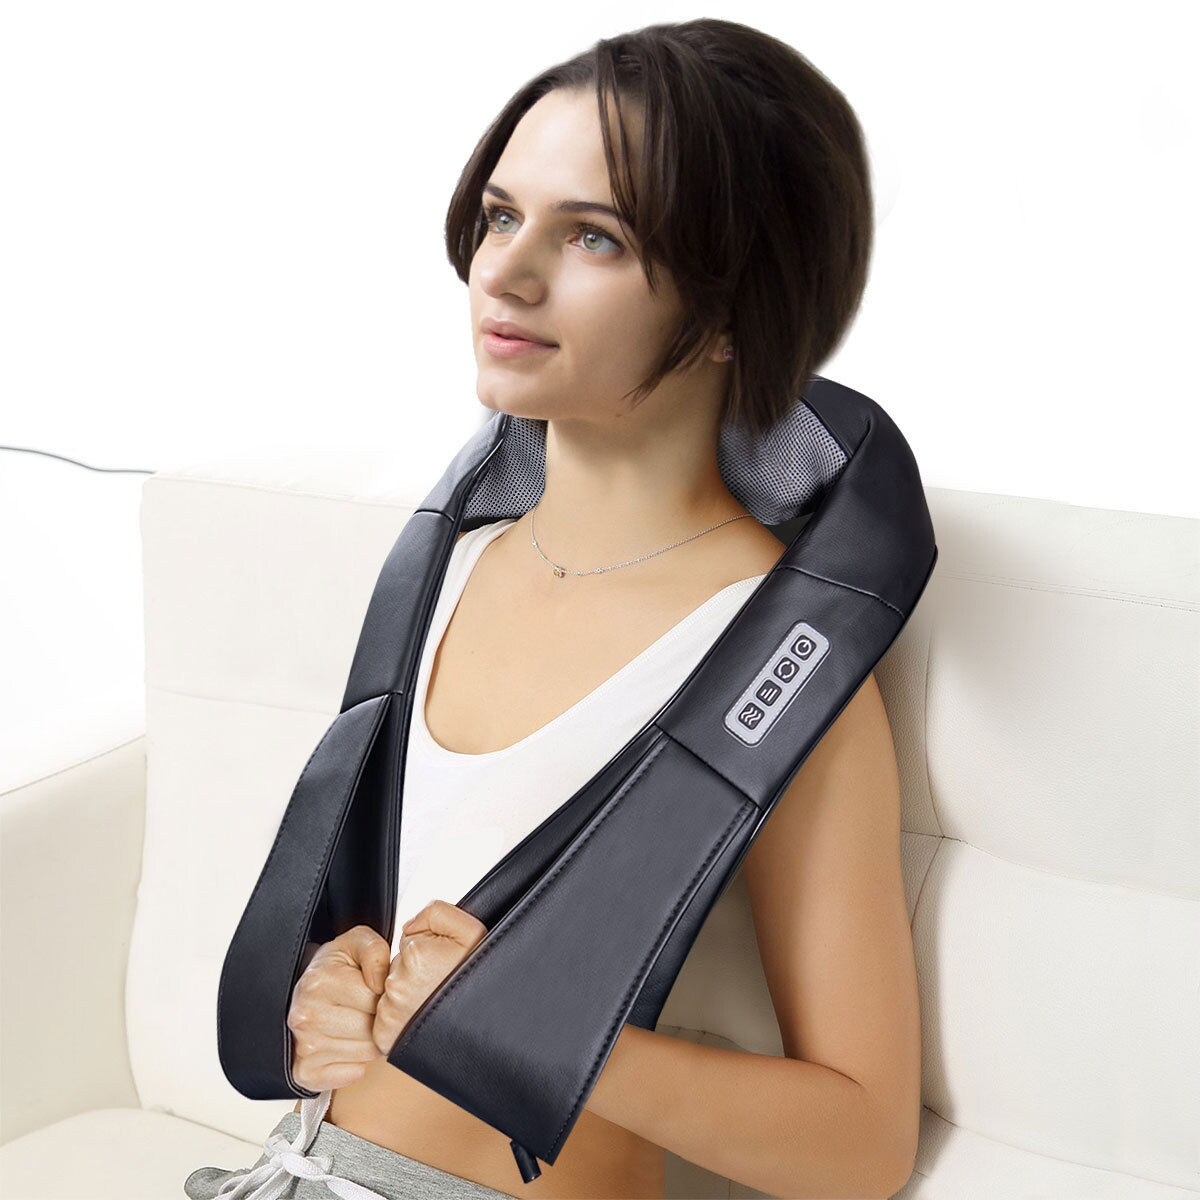 https://ak1.ostkcdn.com/images/products/is/images/direct/1ab4987f7435bb25e591527b36a27c48500d5652/Costway-Shiatsu-Back-and-Neck-Massager-Kneading-Shoulder-Massage-Pillow-W-Heat-Straps.jpg